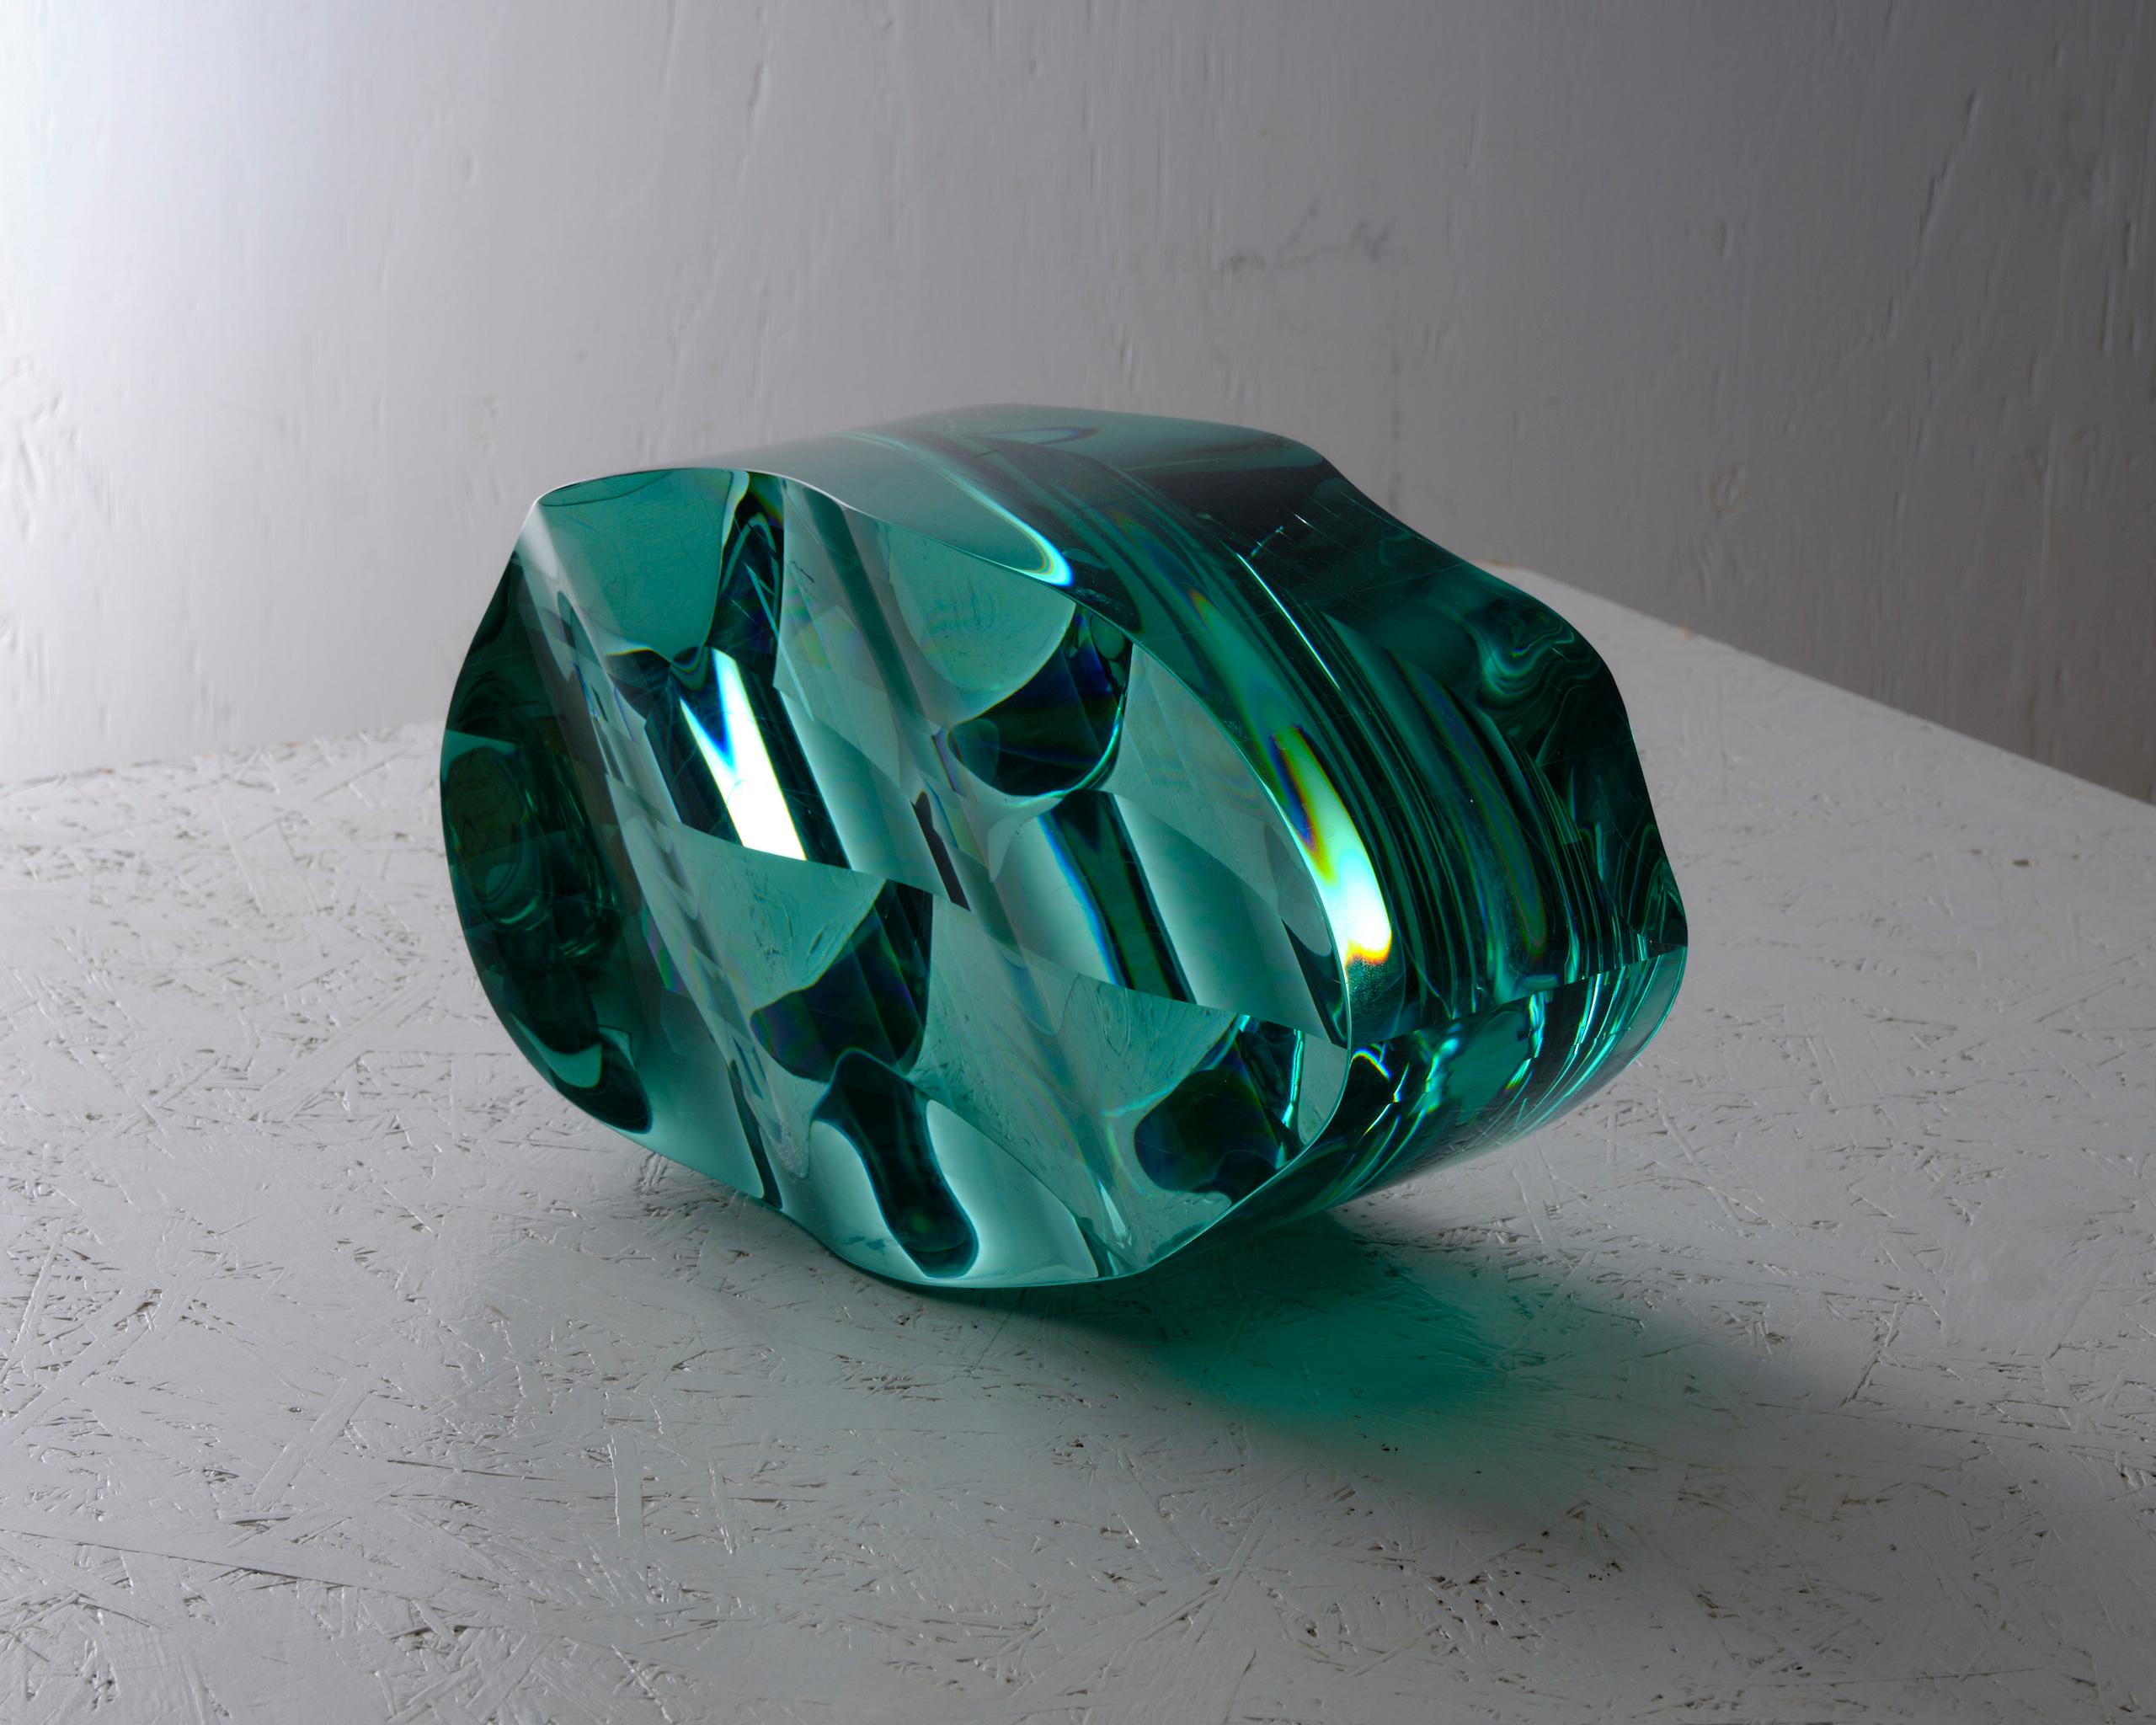 F.230101 is a glass sculpture by Japanese contemporary artist Toshio Iezumi, dimensions are 18 cm × 30 cm × 13 cm (7.1 × 11.8 × 5.1 in). 
The sculpture is signed and numbered, it is part of a limited edition of 5 editions and 4 artist's proofs and